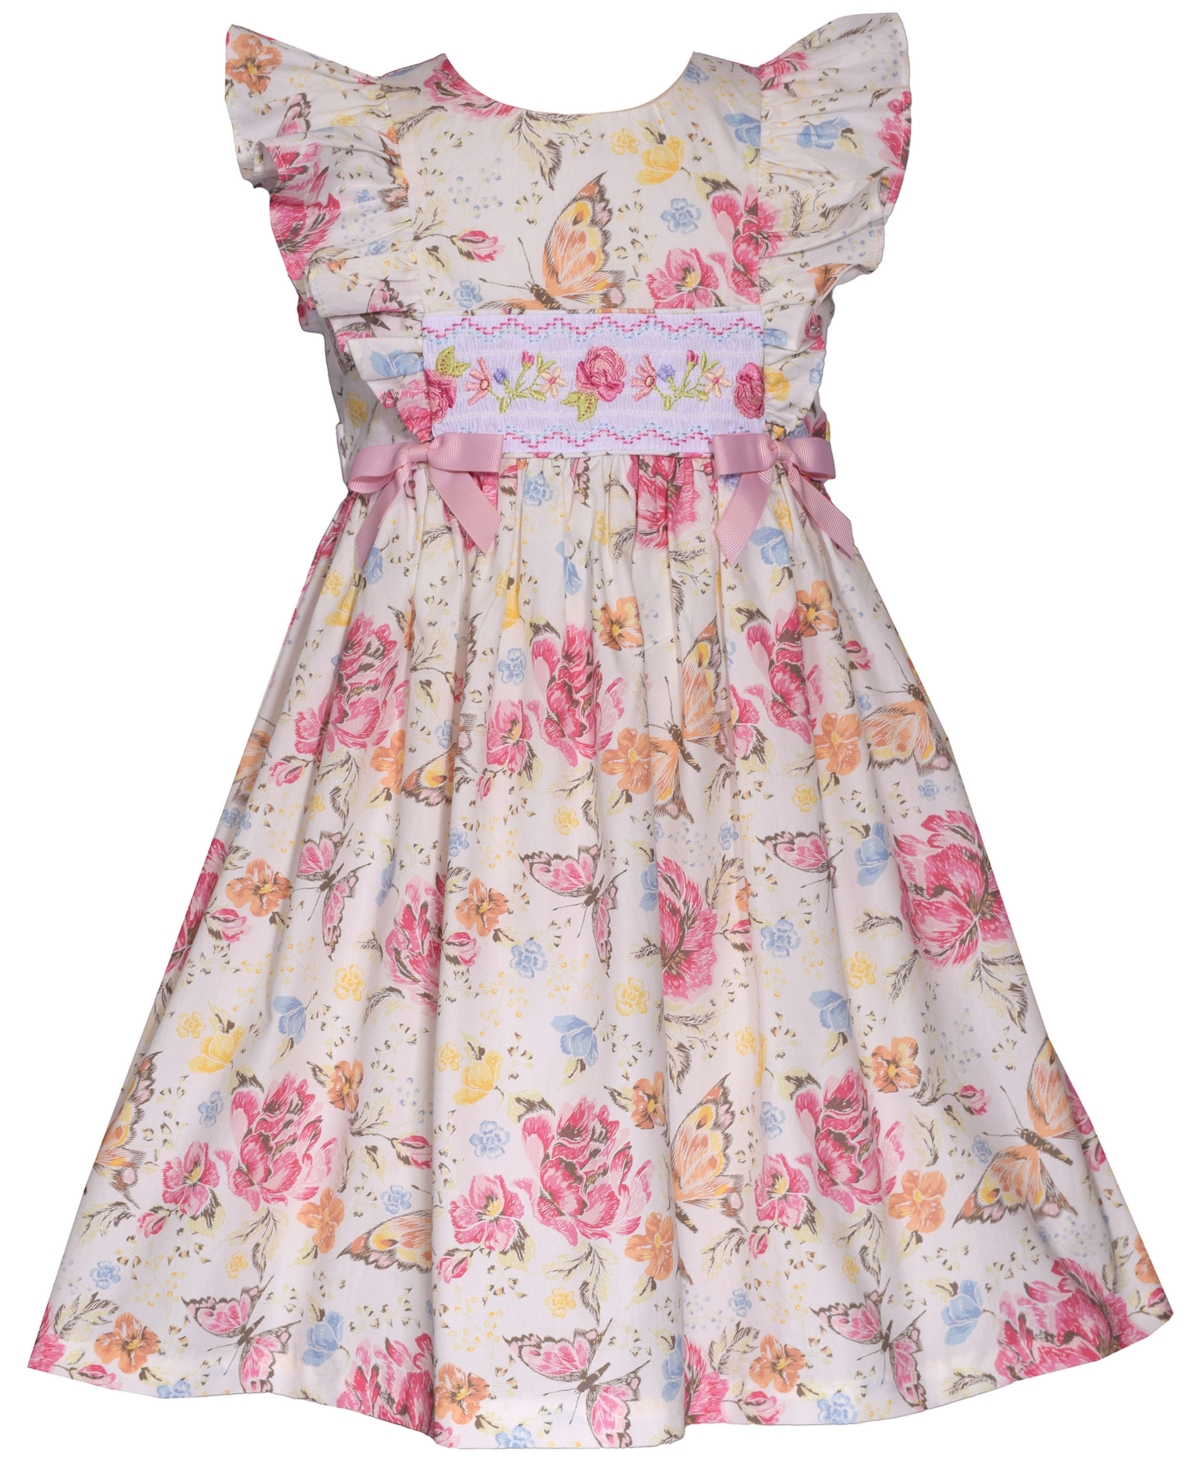 BONNIE JEAN LITTLE GIRLS SMOCKED ROSE AND BUTTERFLY PRINT DRESS